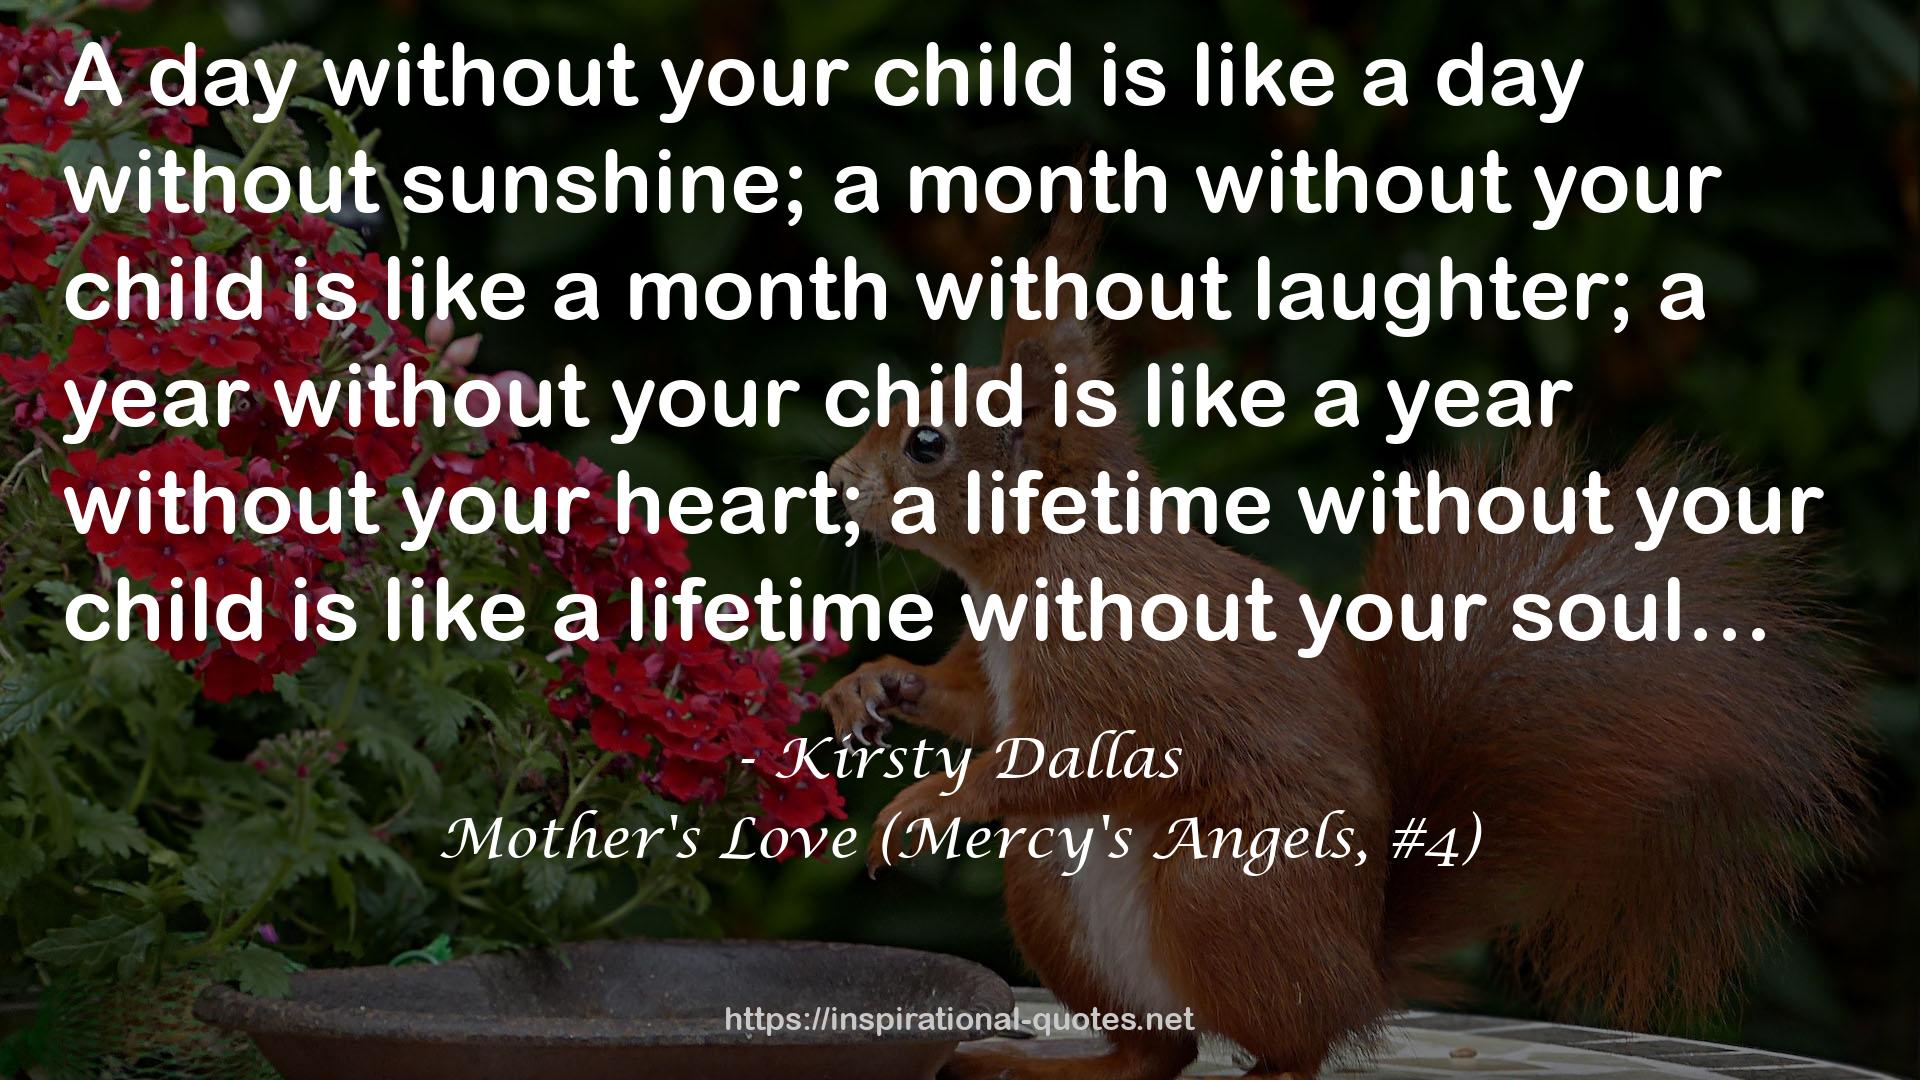 Mother's Love (Mercy's Angels, #4) QUOTES